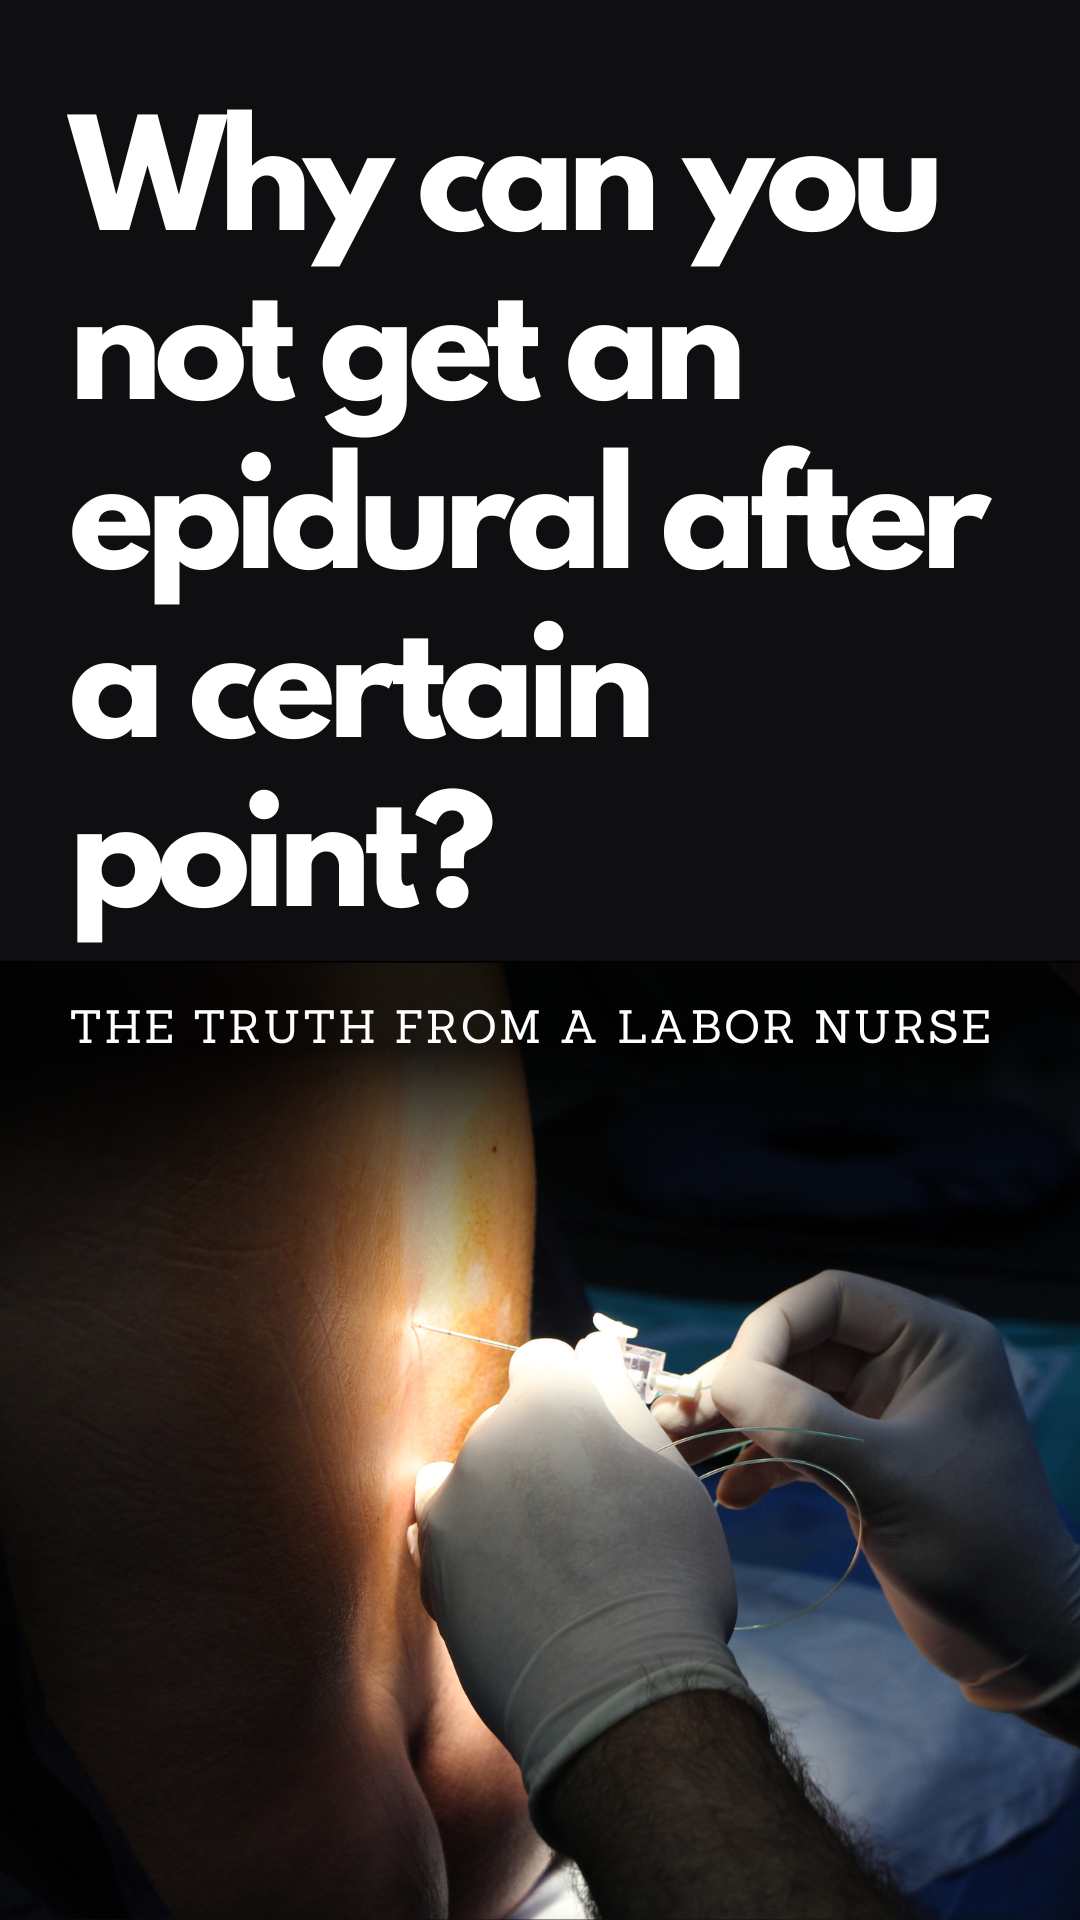 When is it too late for an epidural? You thought an epidural was your saving grace for labor pain, but did you know there's a deadline on when you can get one? Diving into the world of epidurals, we unravel the reasons behind this crucial cut-off point, and why it might not be as flexible as you think. Stay tuned!